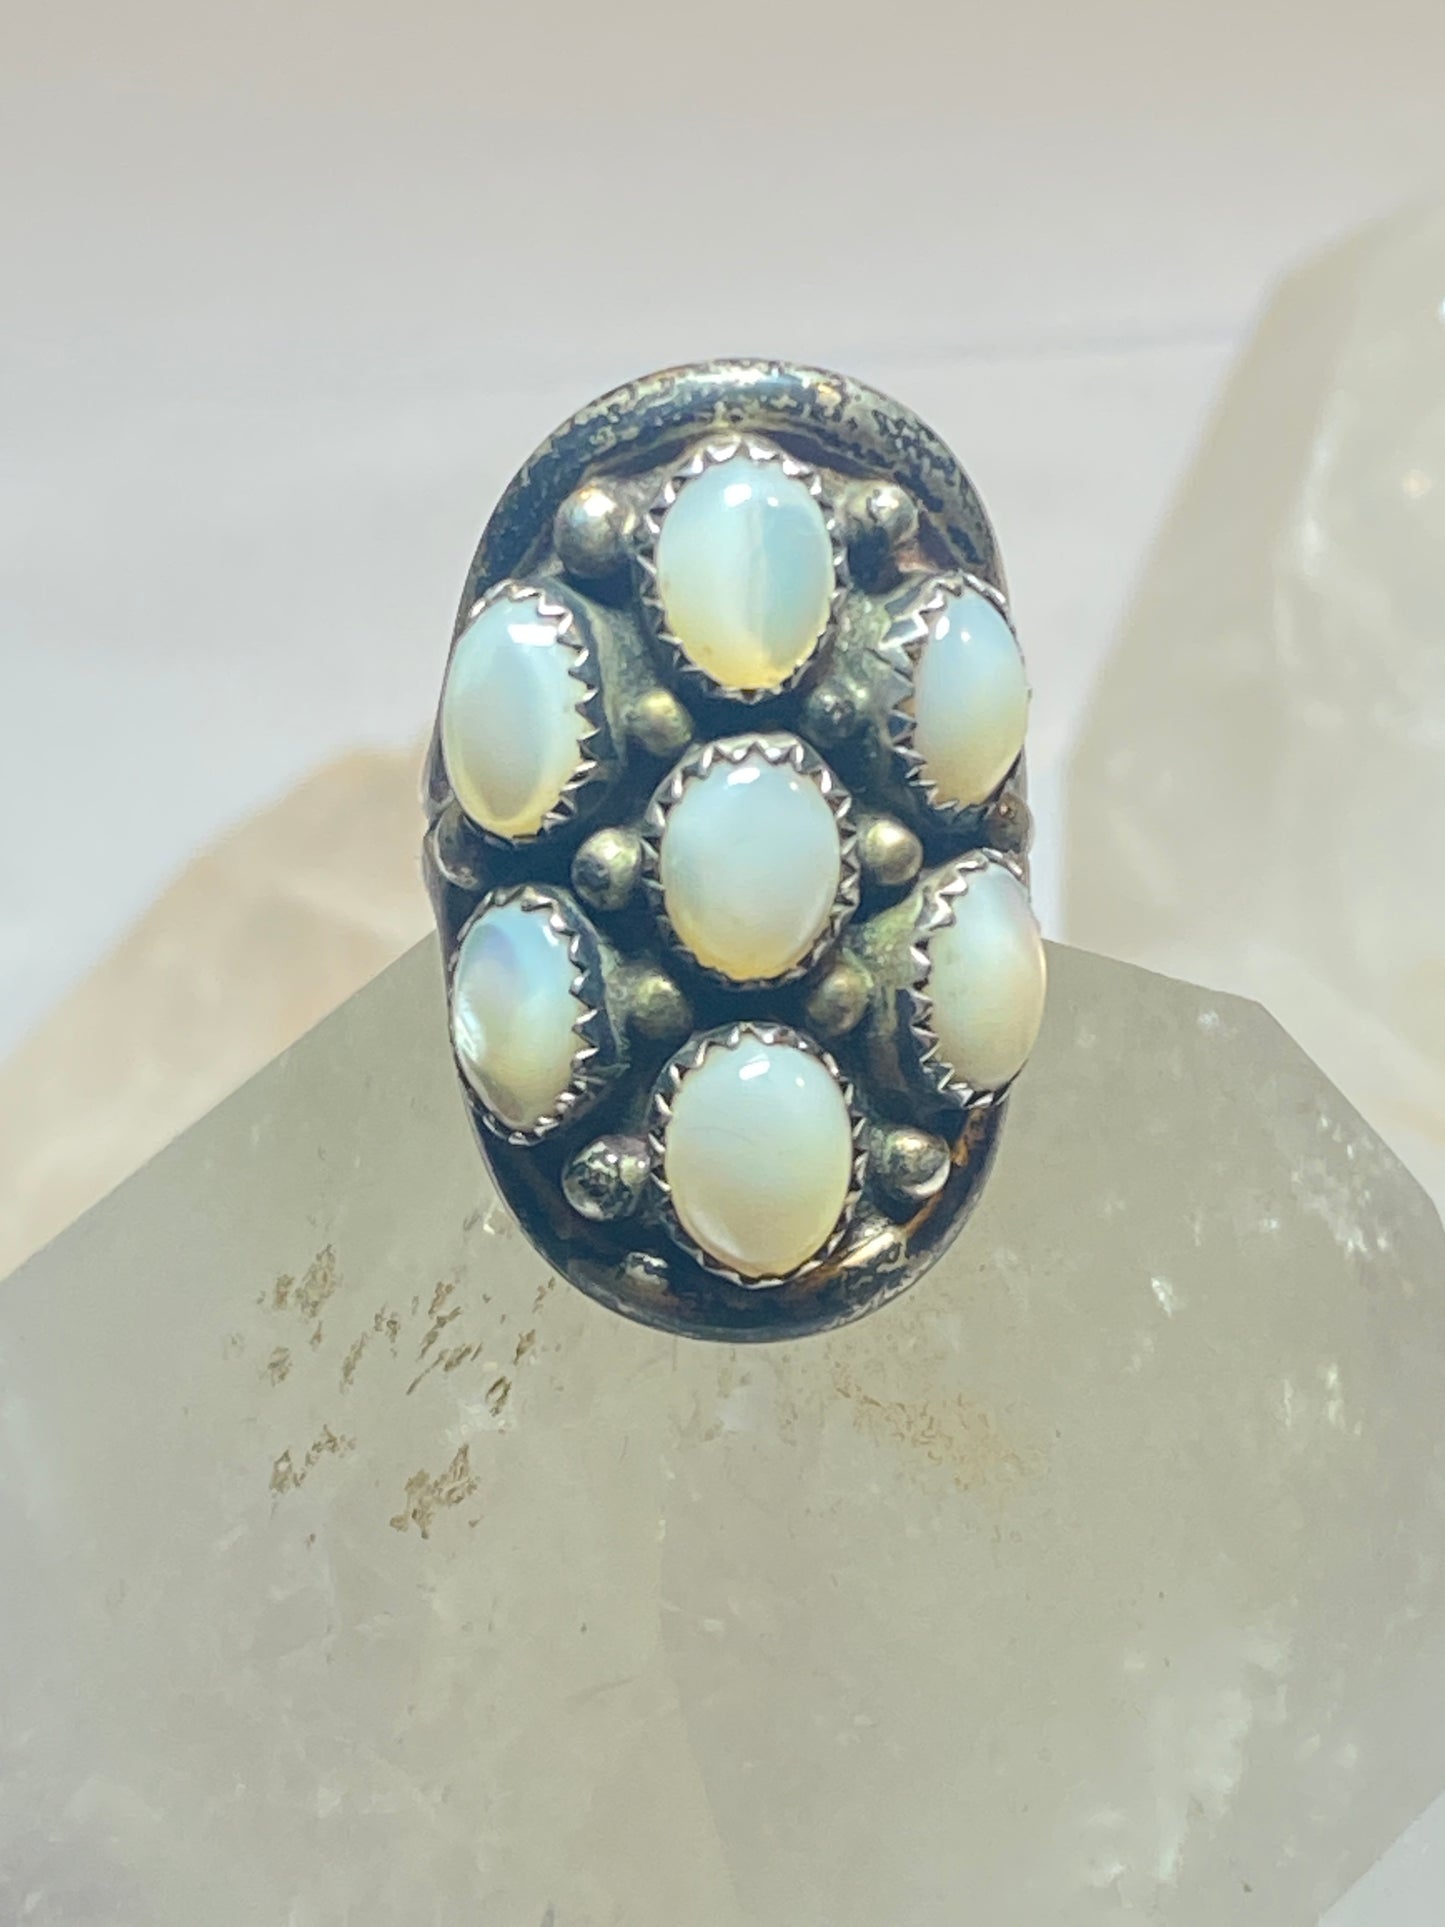 Saddle ring mother of pearl Navajo southwest sterling silver women girls